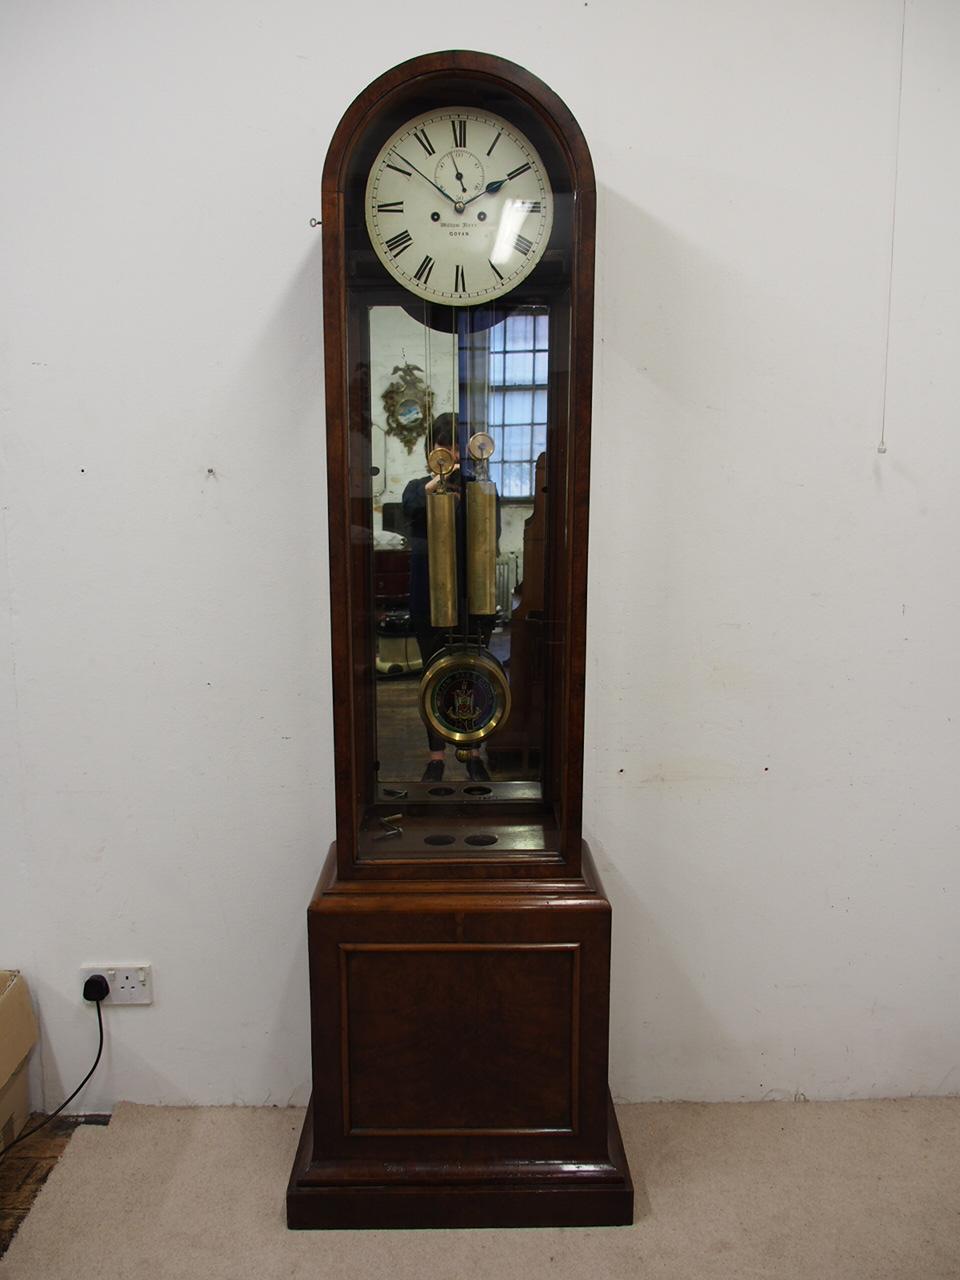 Rare domed top walnut and burr walnut clock by William Barr of Govan, circa 1800s. It has tempered steel hands, with a wood, brass and painted pendulum and a painted panel to the face. This has a coat of arms, and features the clockmakers name. The